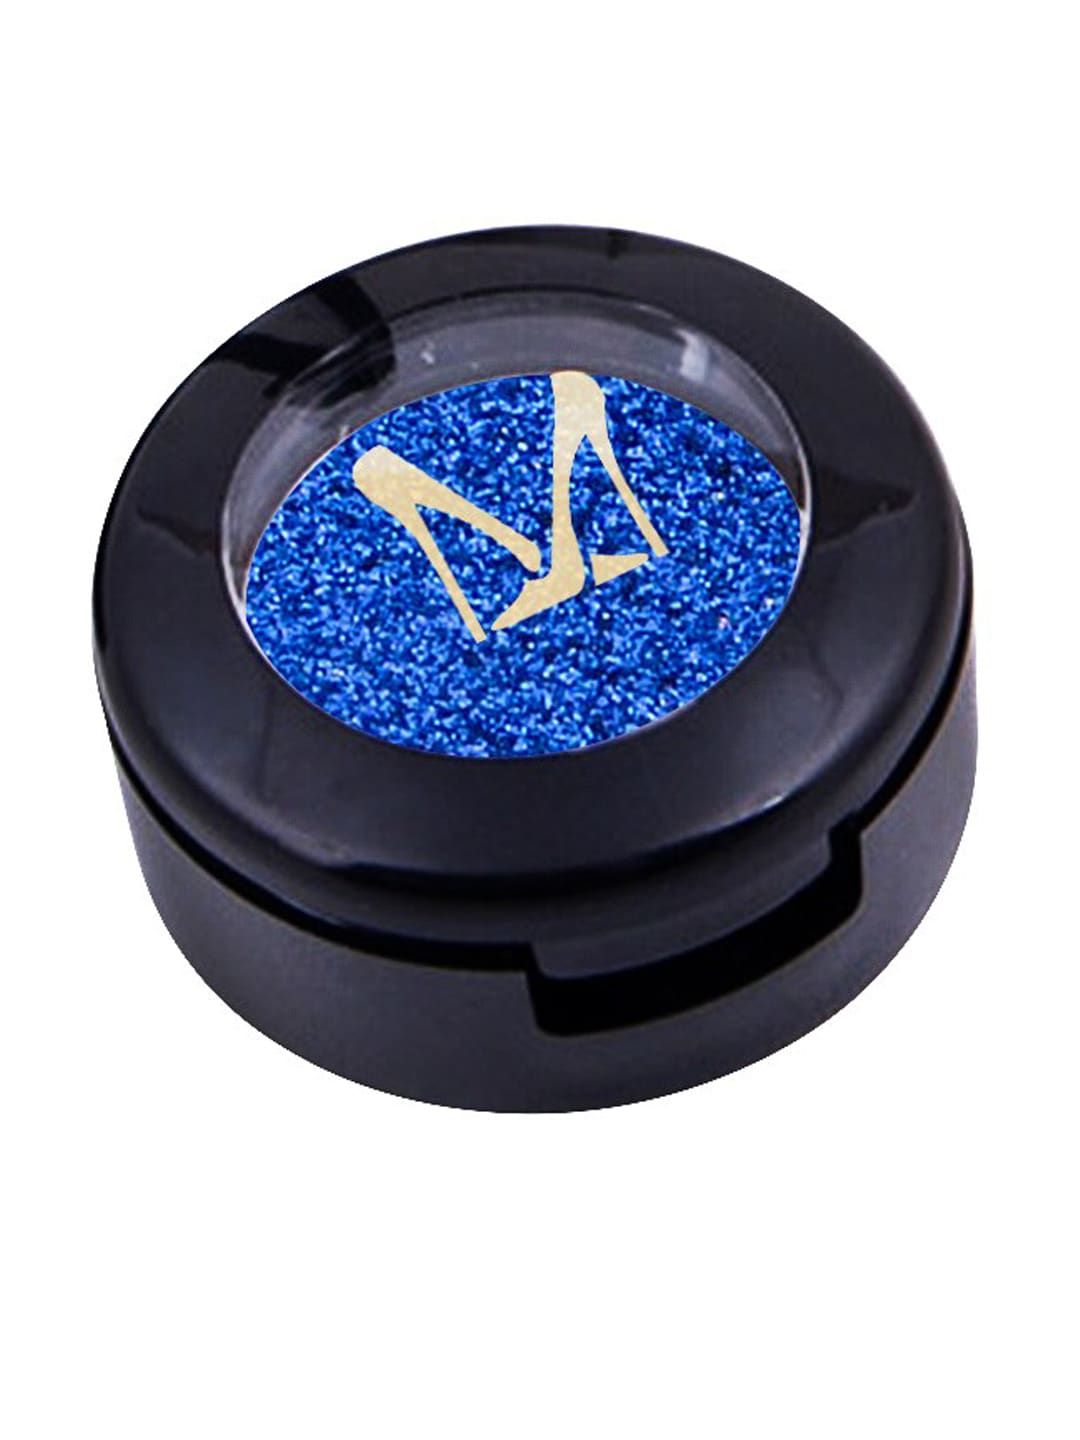 MISS ROSE Ocean Blue Single Color Eyeshadow Shinning Glitter Glow Pigament Price in India